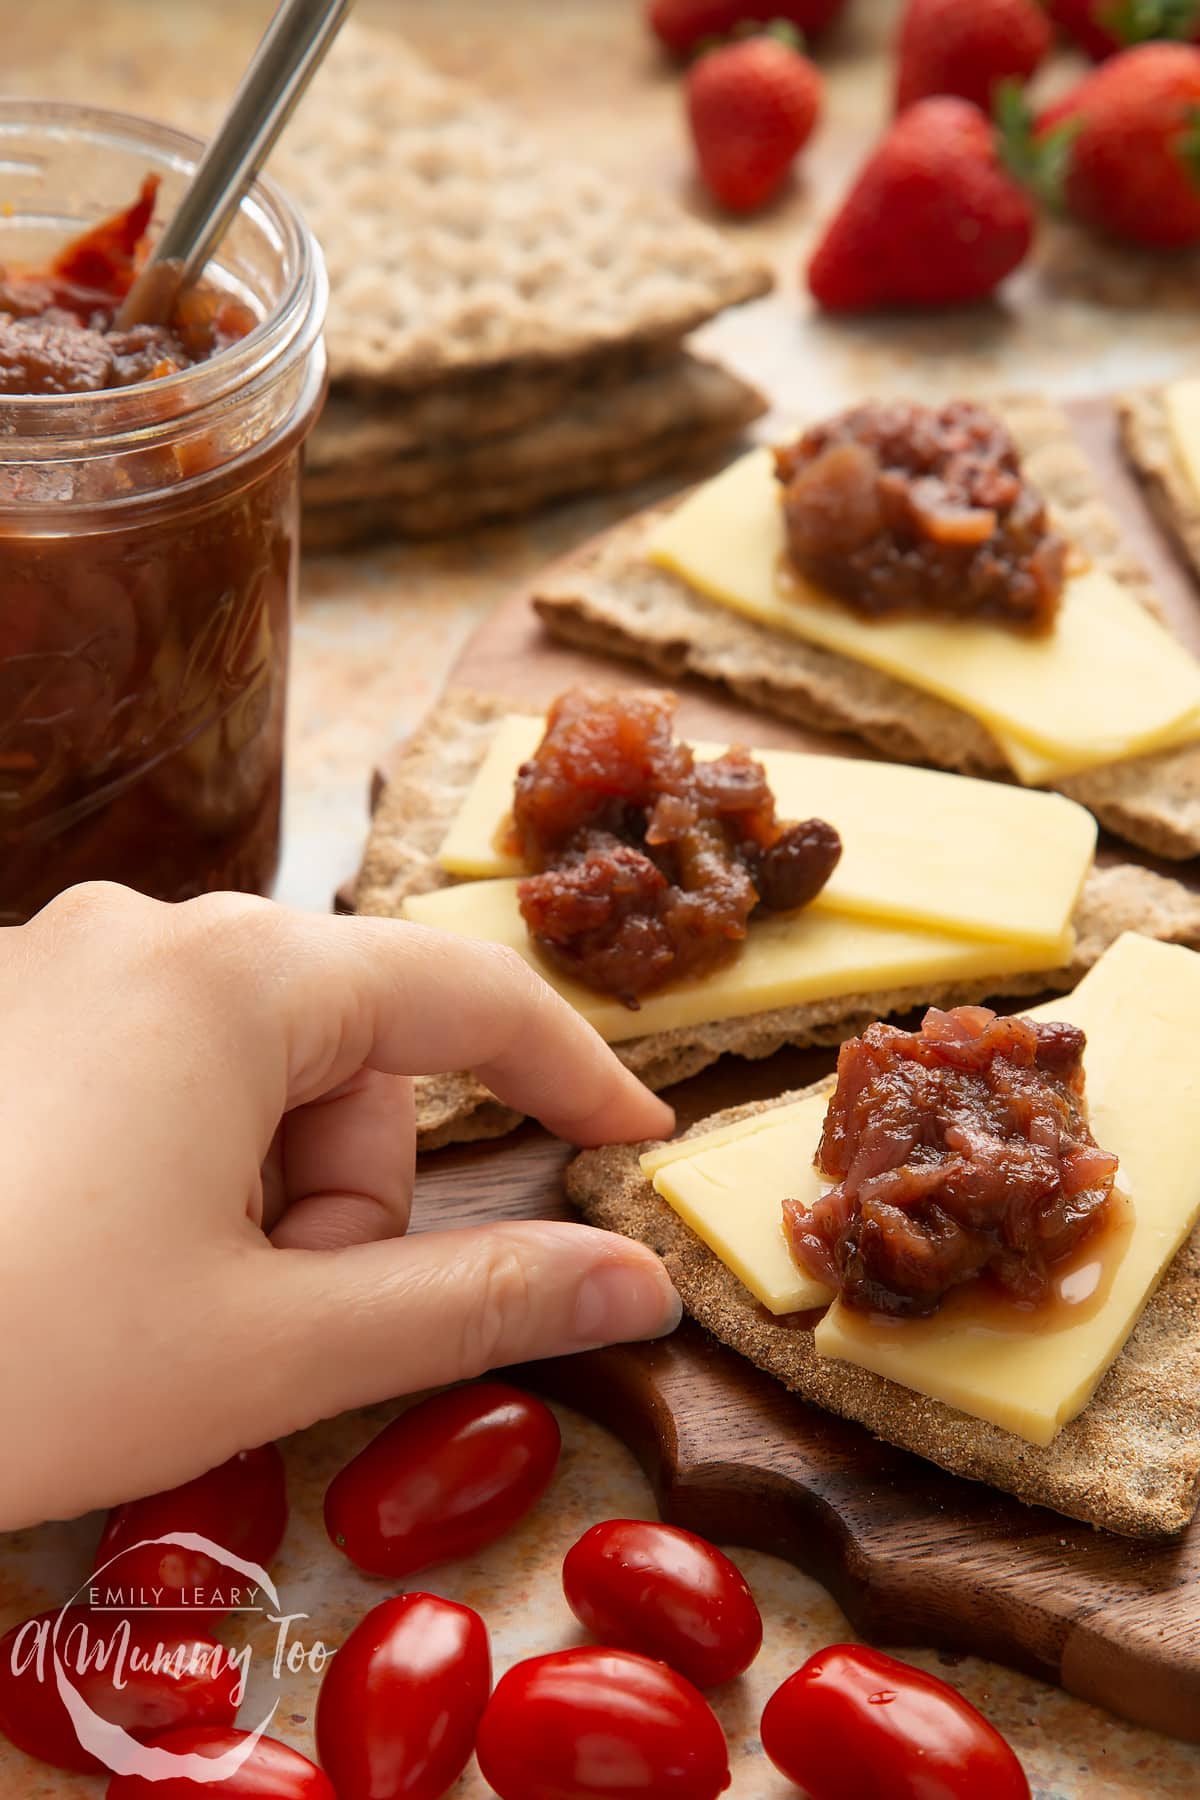 Triangular crackers topped with cheese slices and a fruit chutney recipe on a wooden board, next to a jar of chutney. Salad surrounds the board. A hand reaches to take a cracker.